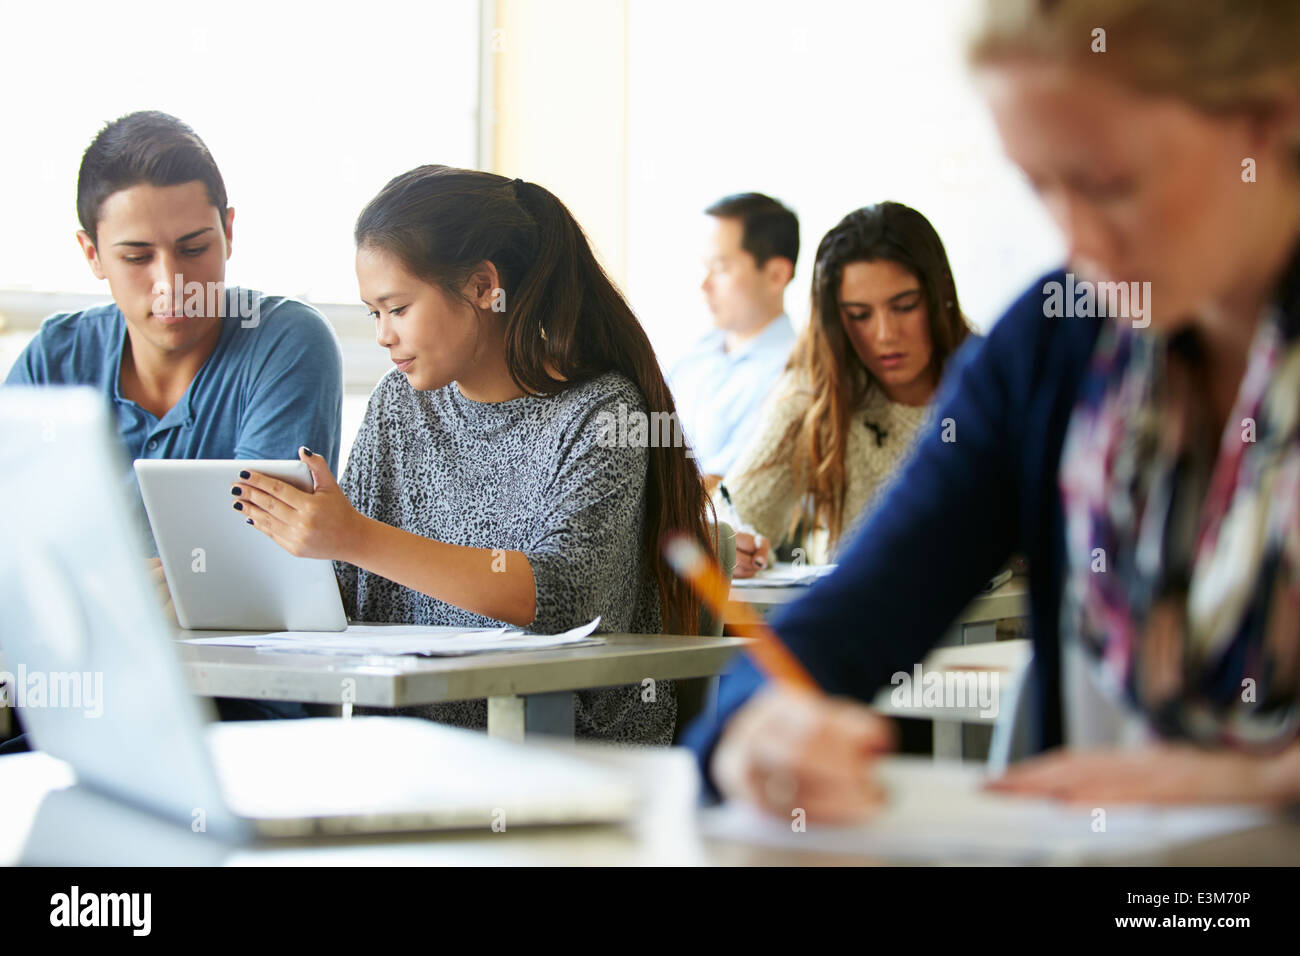 High School Students With Laptops And Digital Tablets Stock Photo